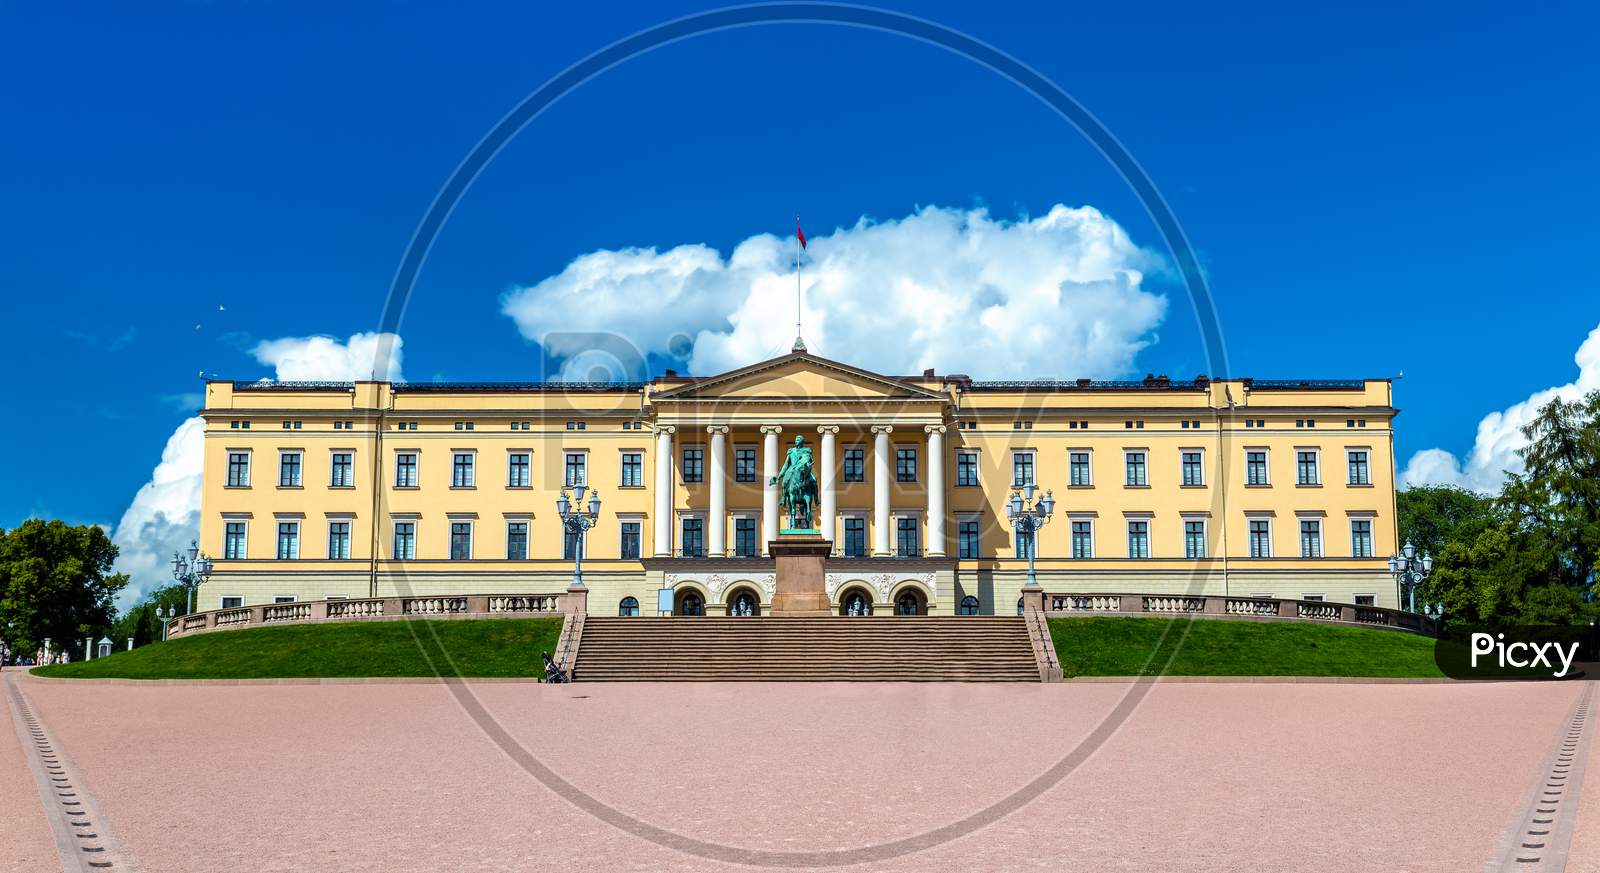 The Royal Palace In Oslo